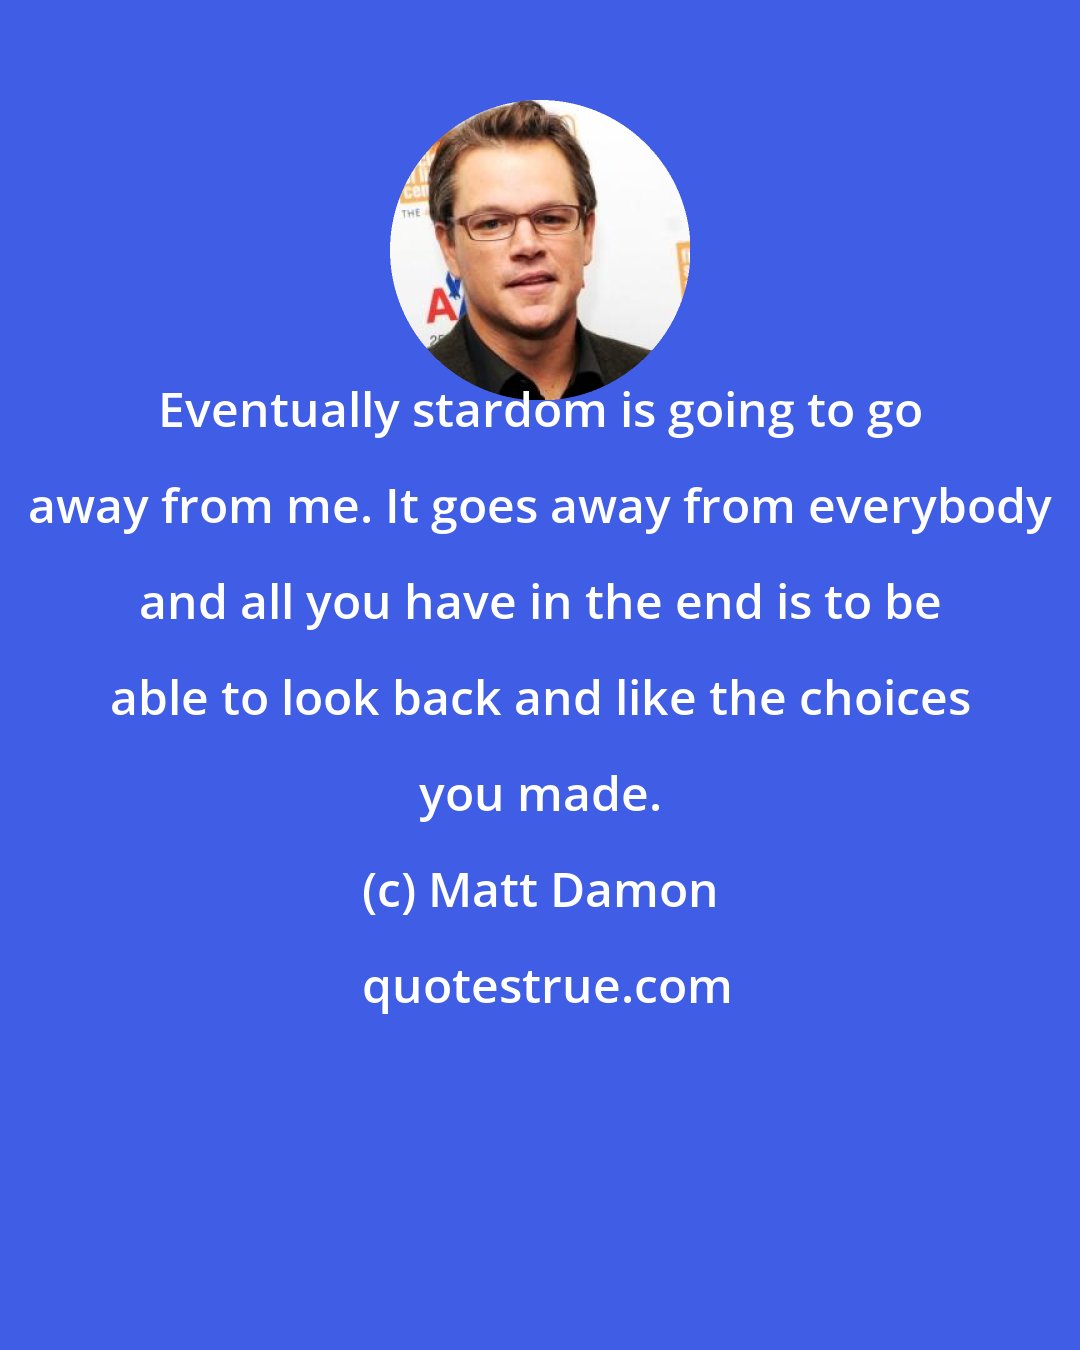 Matt Damon: Eventually stardom is going to go away from me. It goes away from everybody and all you have in the end is to be able to look back and like the choices you made.